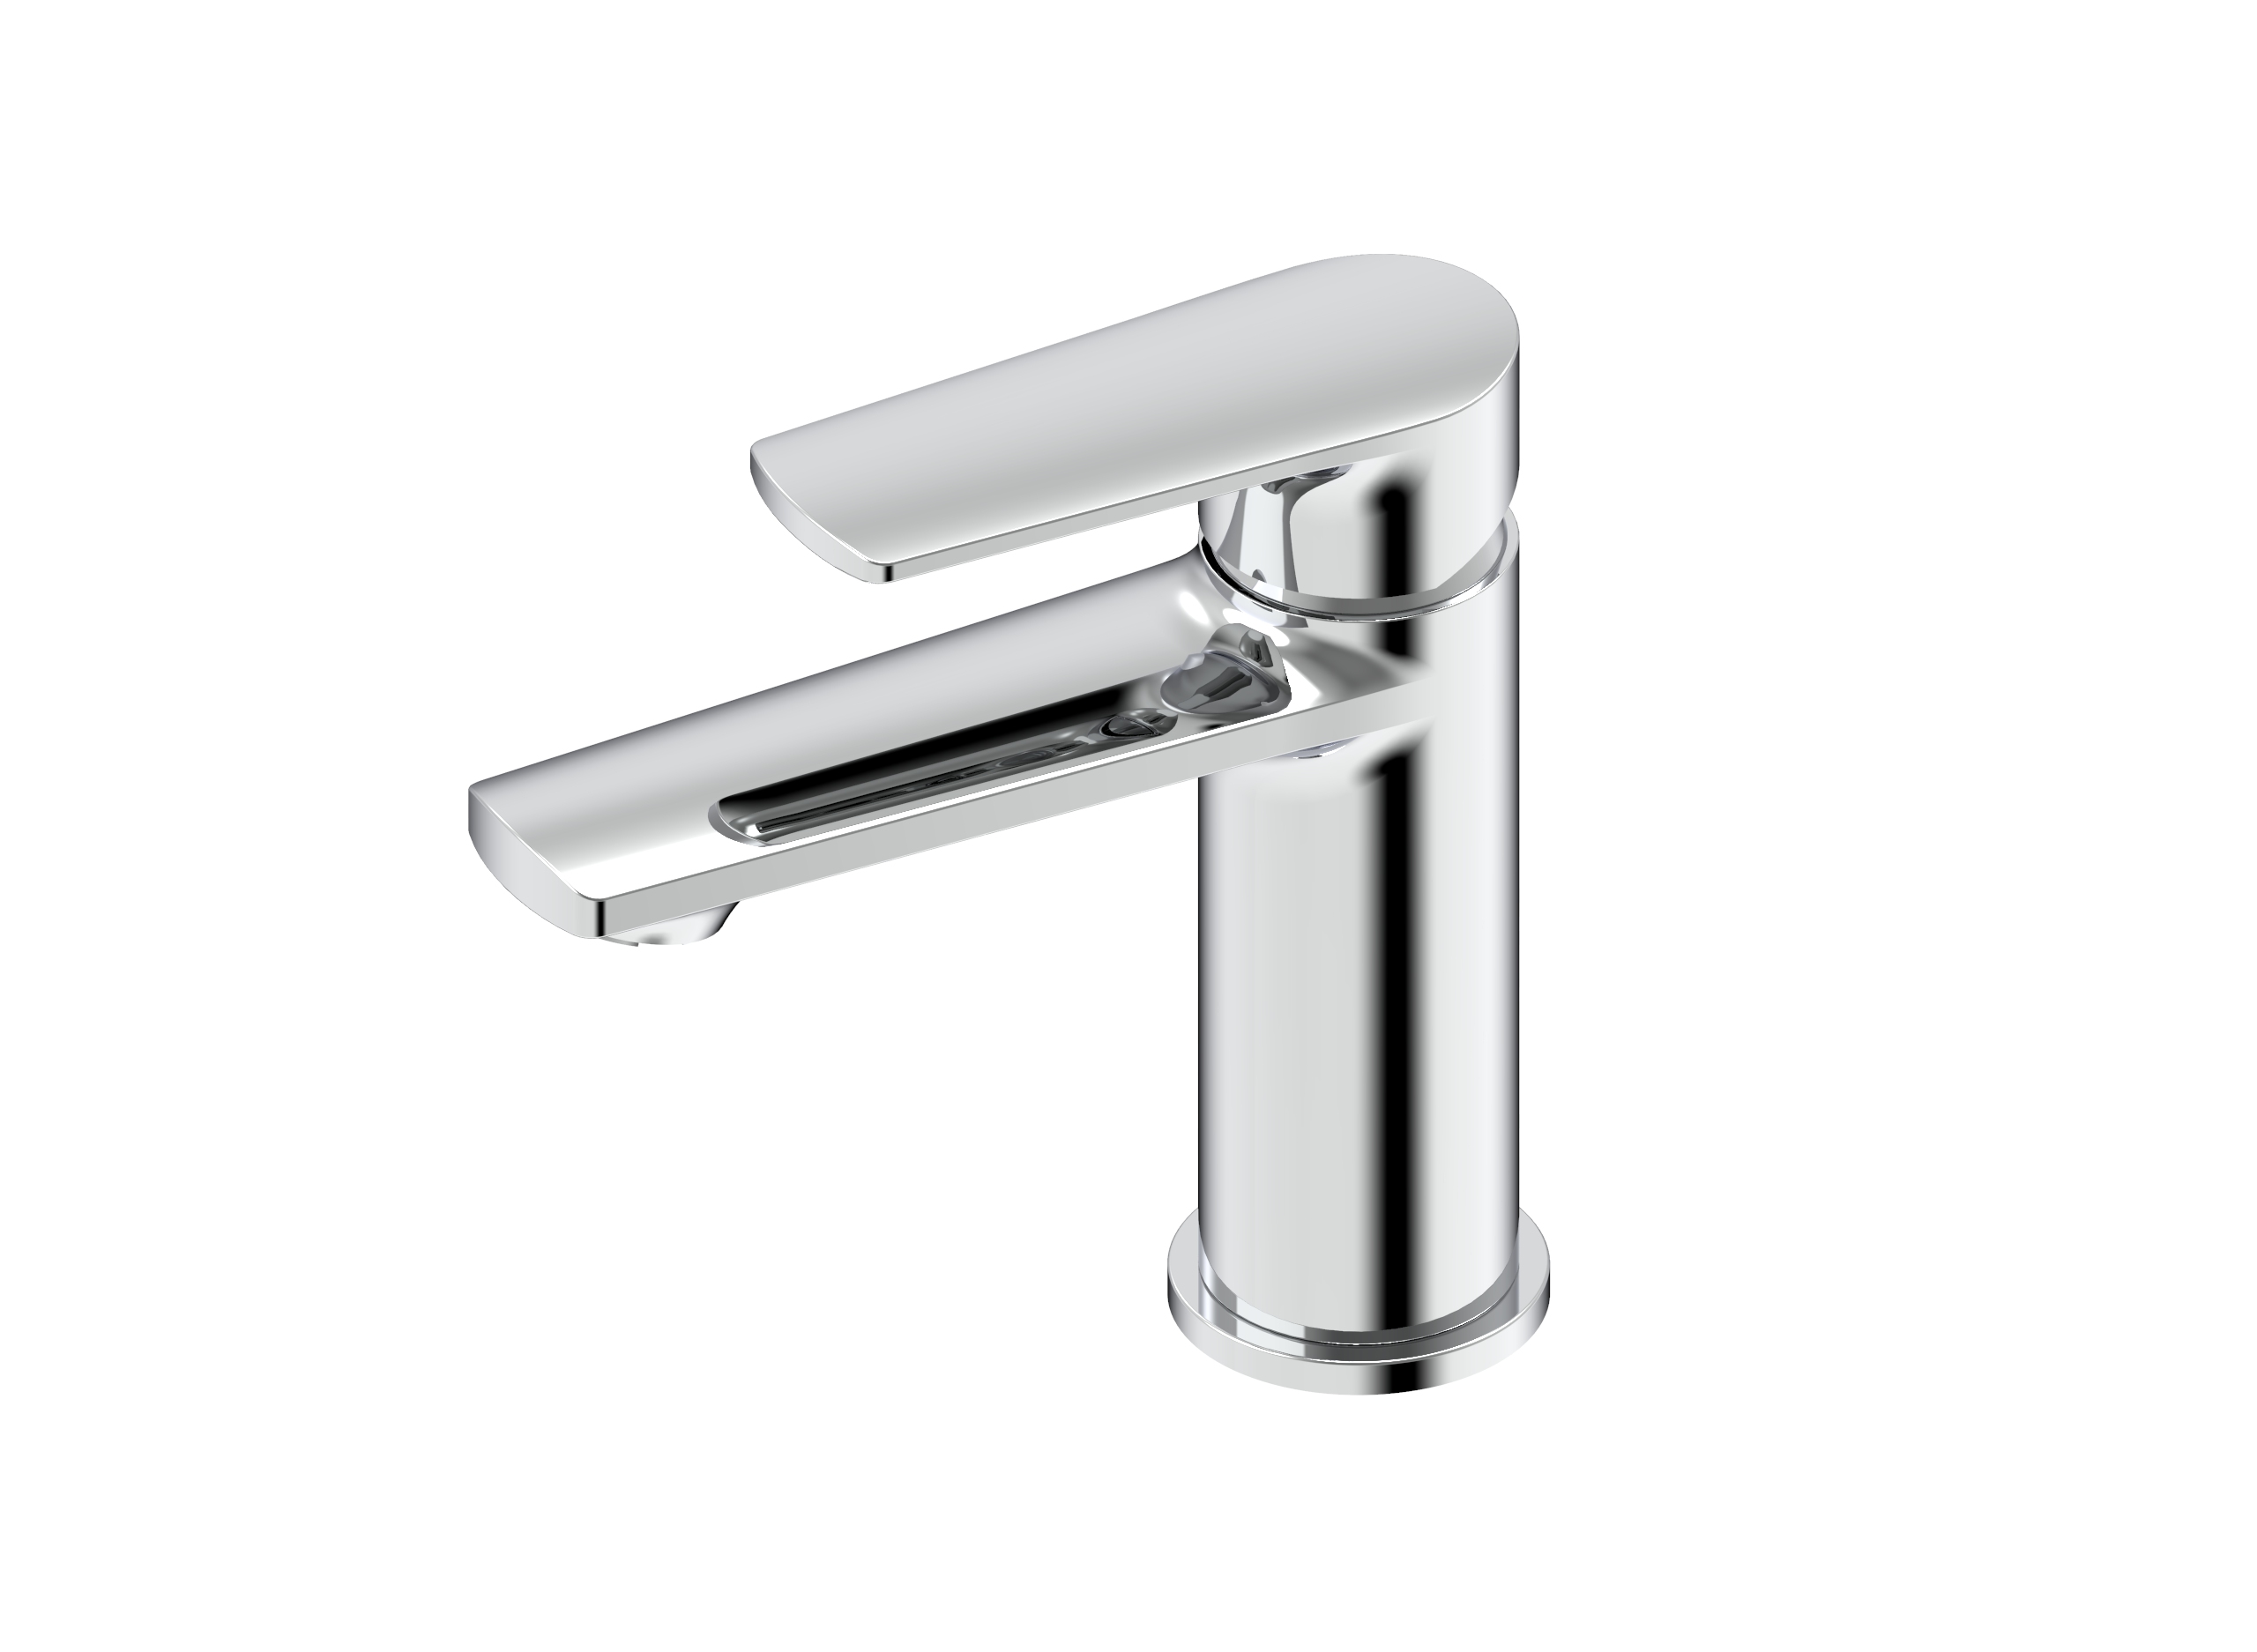 What are the differences in the design and installation requirements of Brass Basin Faucets for different installation environments (such as bathrooms, kitchens, etc.)?